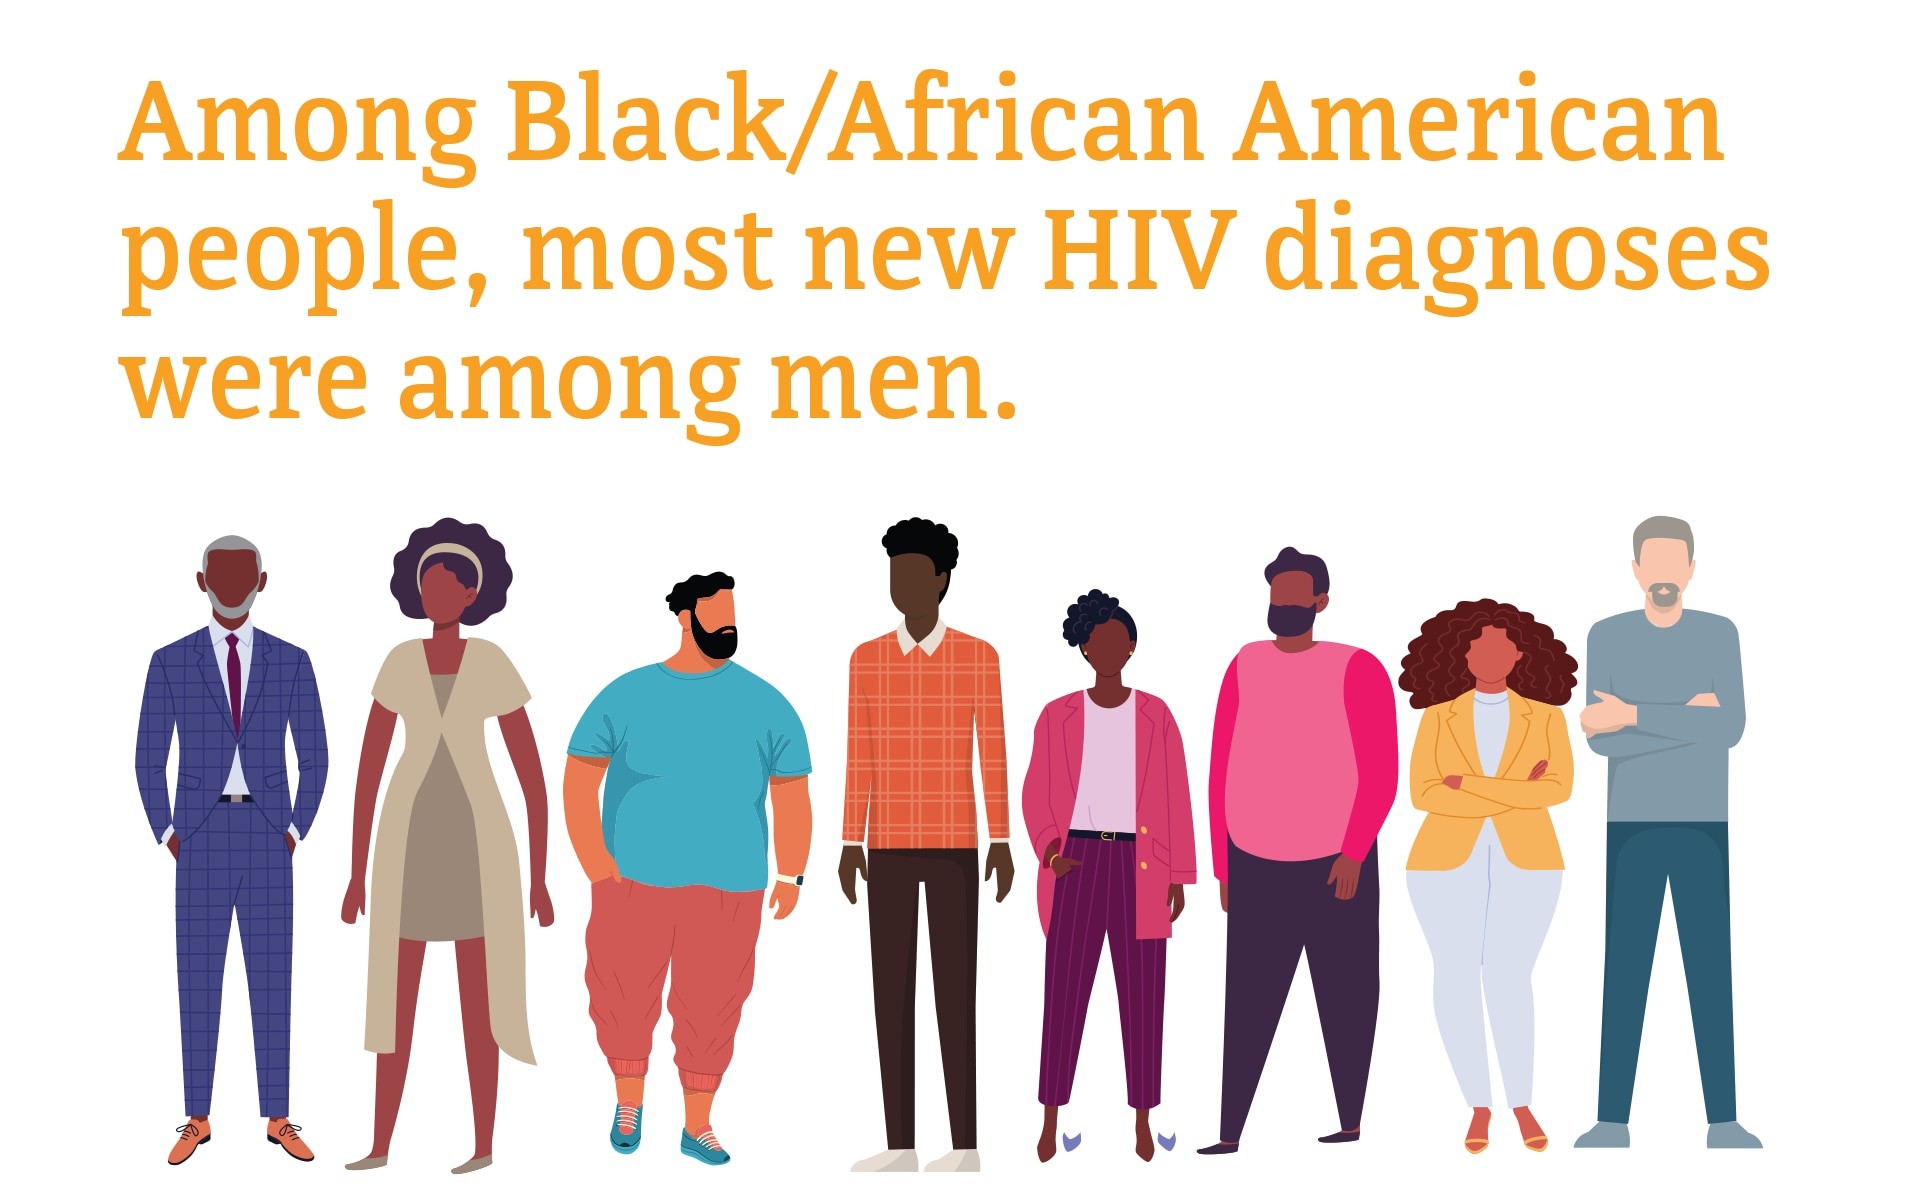 Among Black/African American people, most new HIV diagnoses were among men.